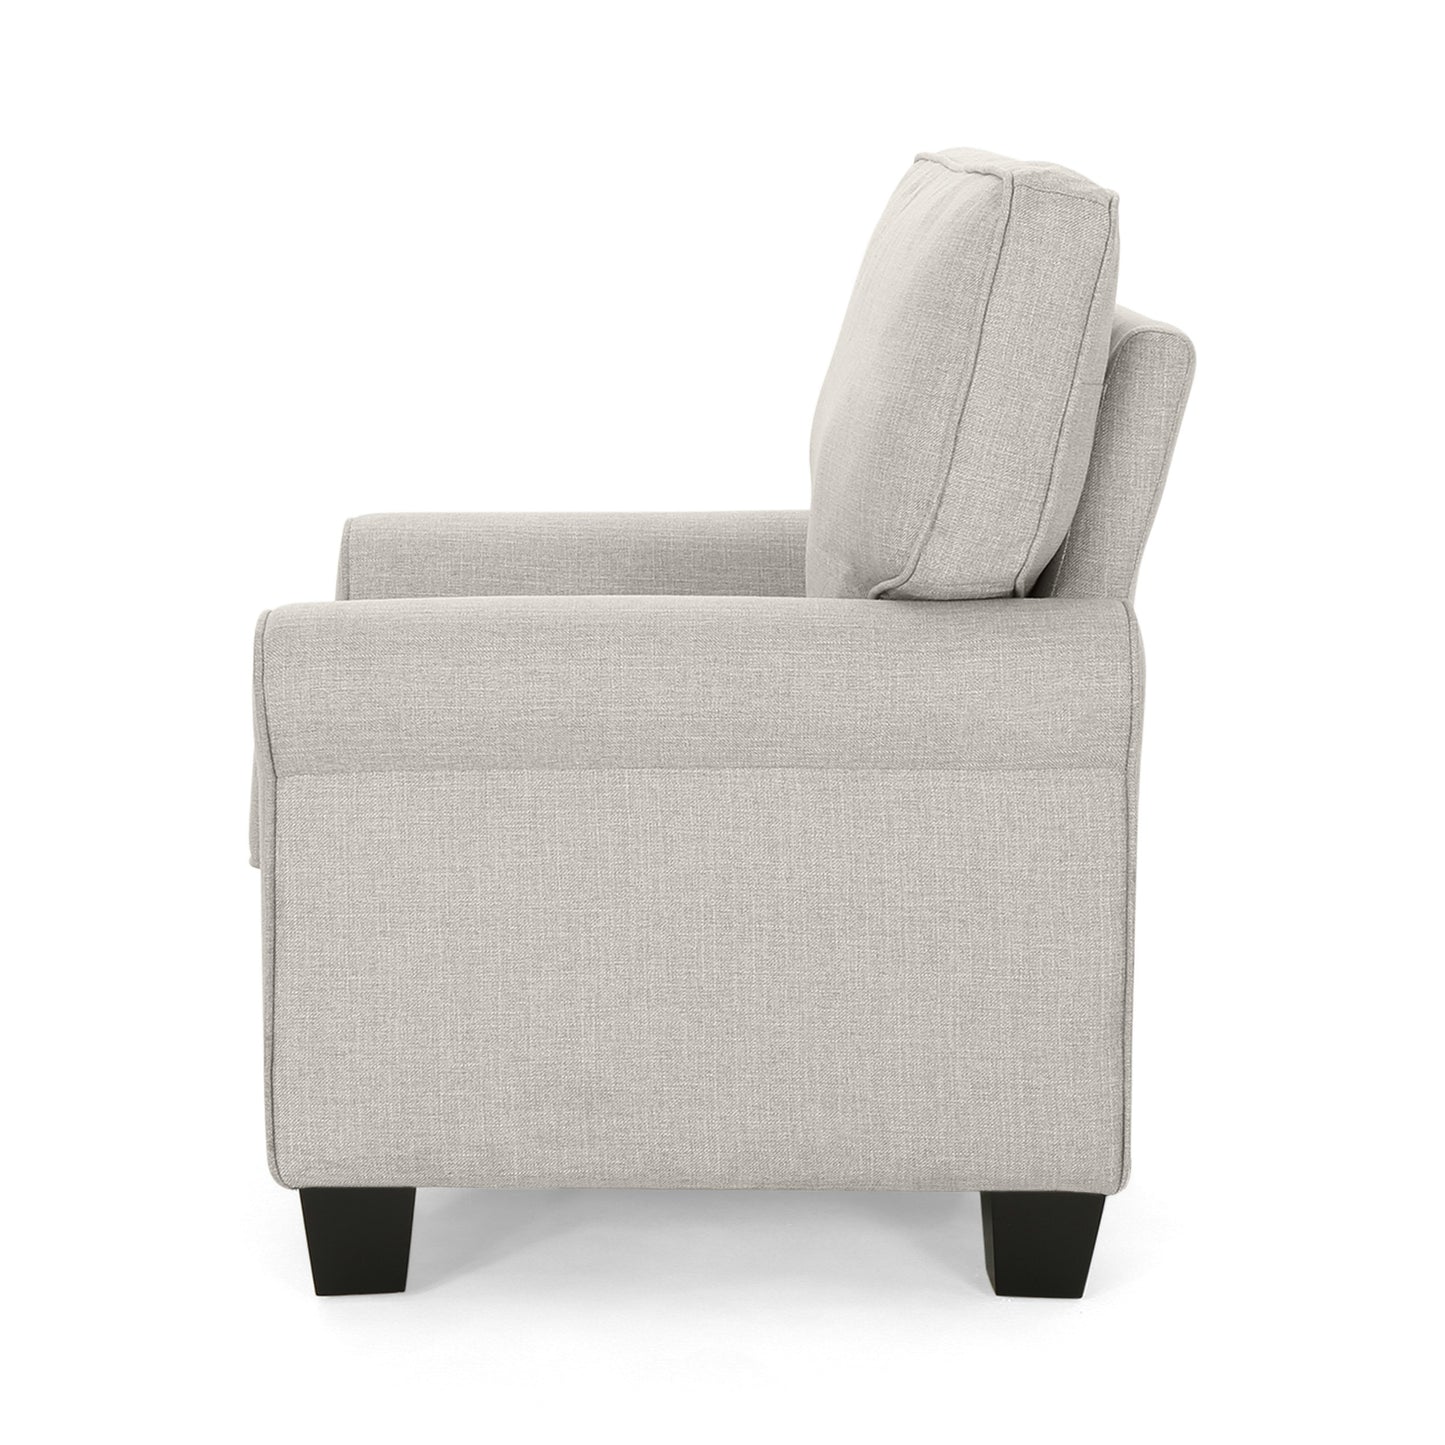 Patricia Contemporary Scrolled Arm Upholstered Fabric Club Chair w/ Tonal Piping